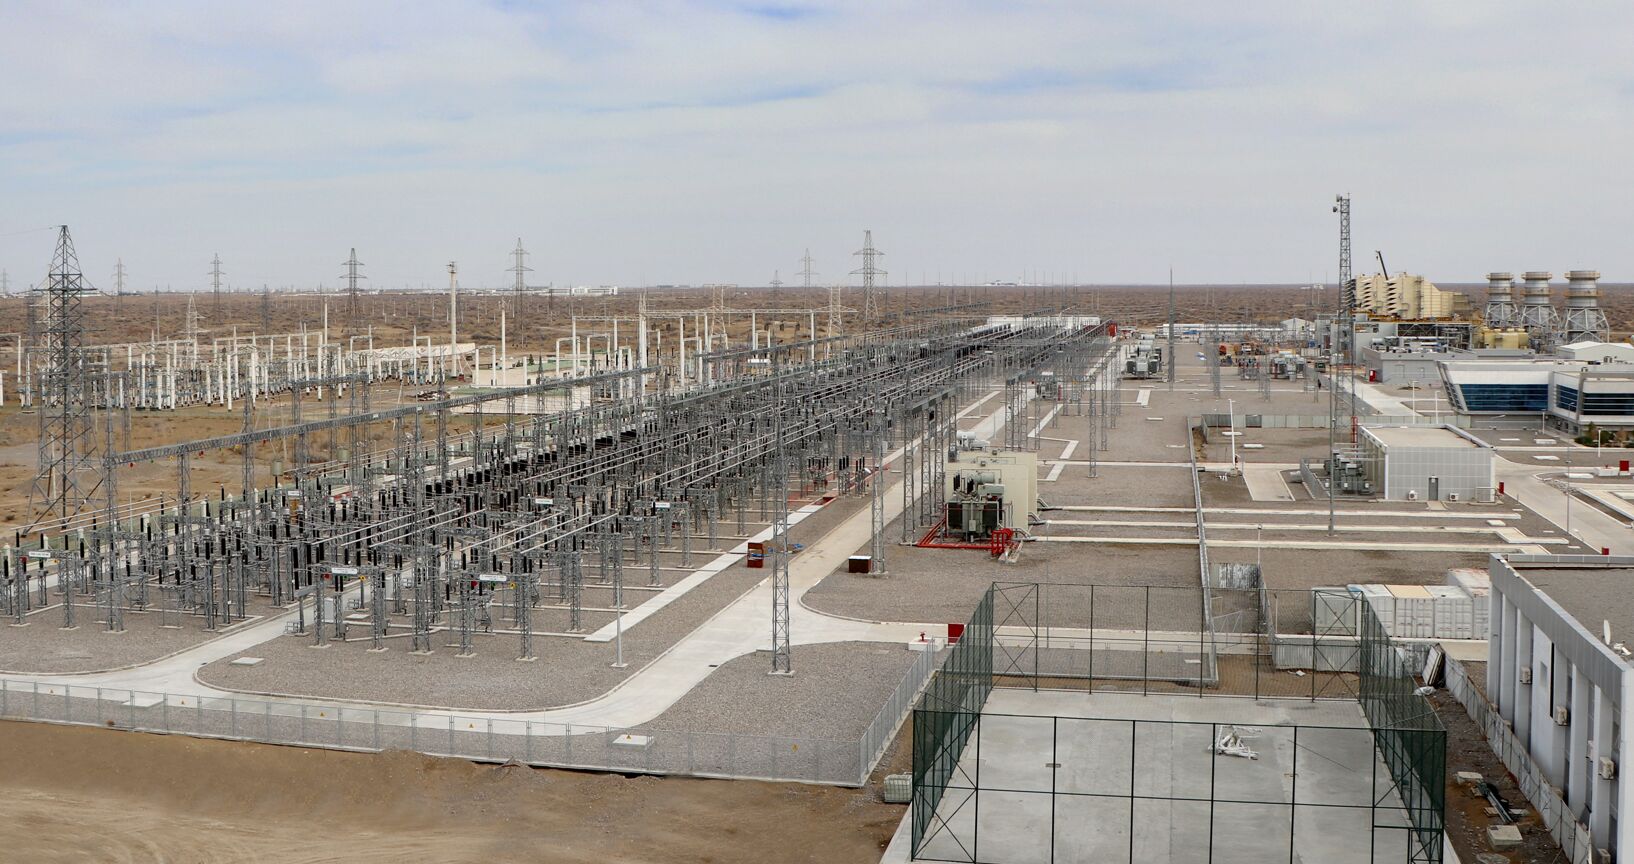 zerger-432mw-simple-cycle-power-plant-gallery-18